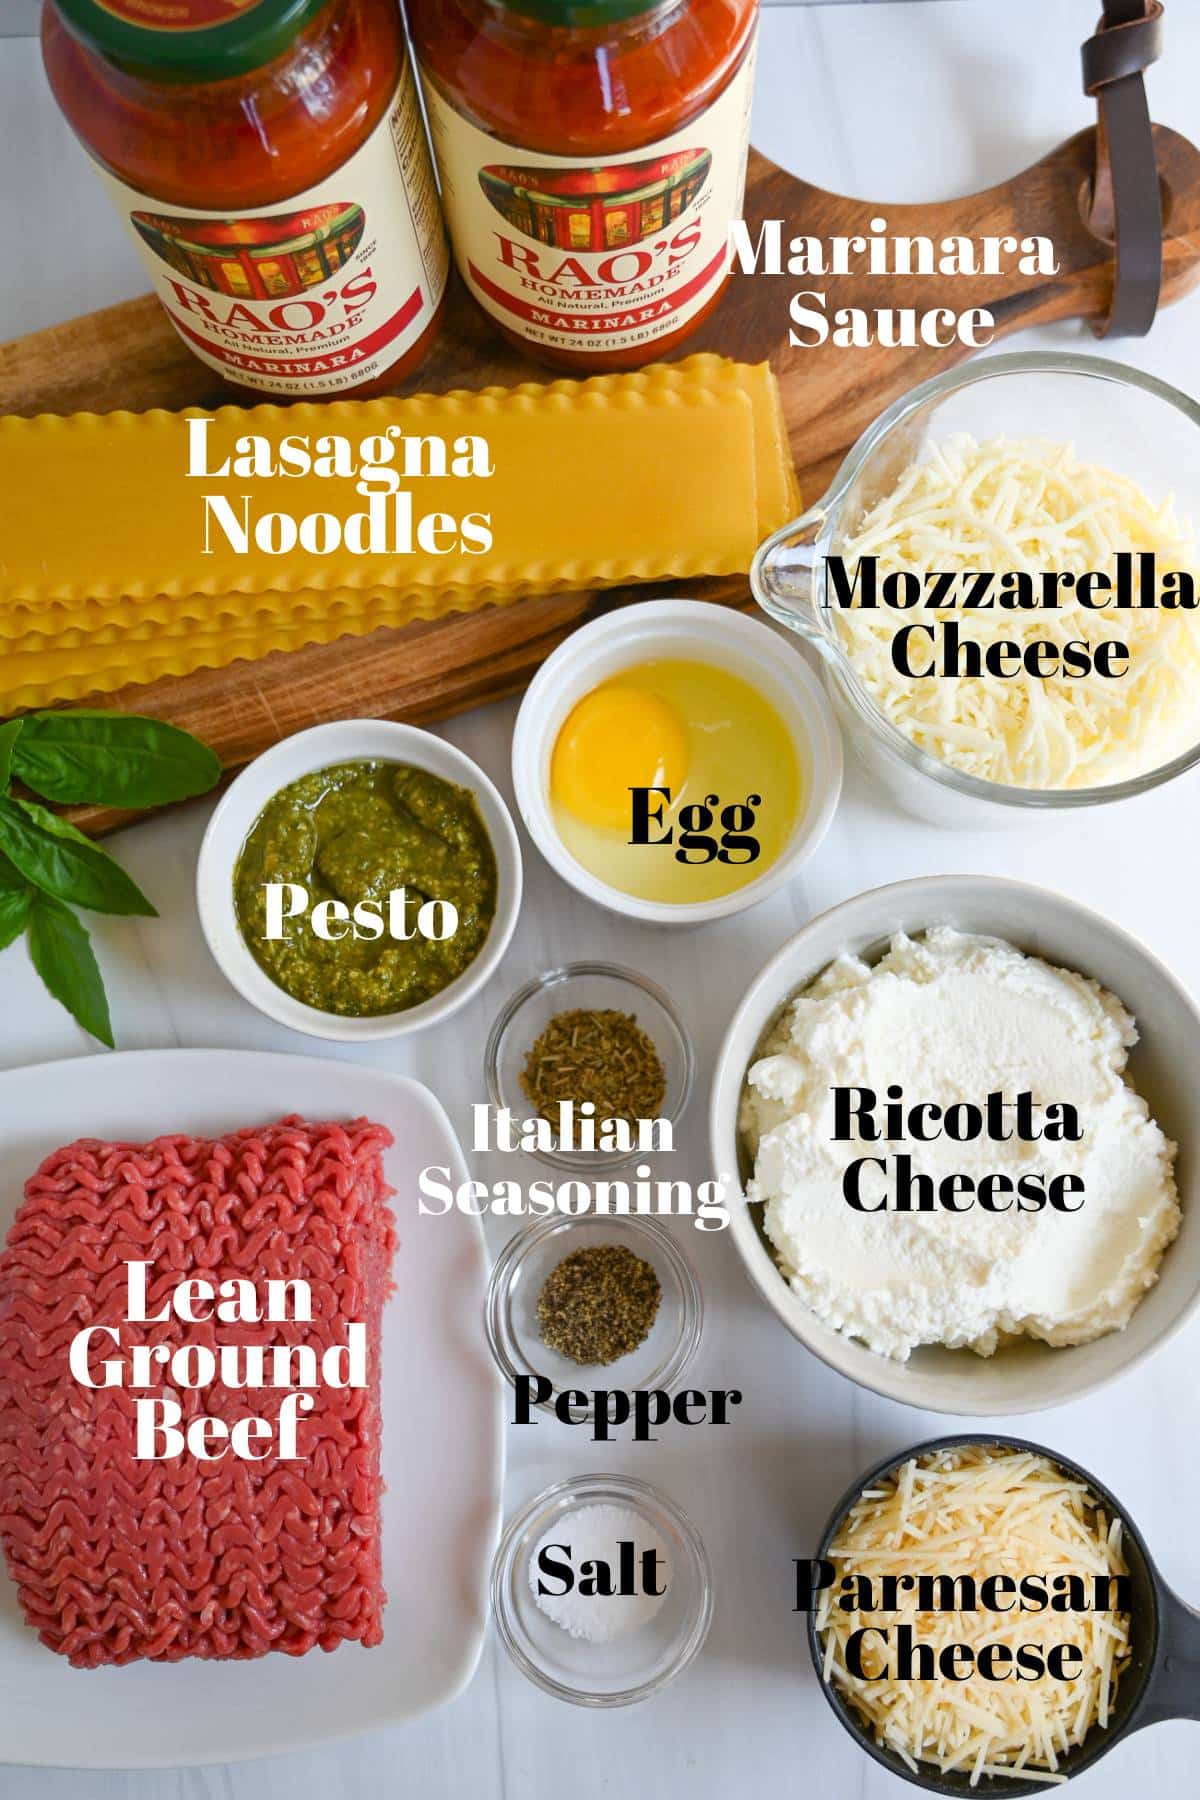 ingredients for making lasagna with ground beef and pesto sauce measured out on a counter